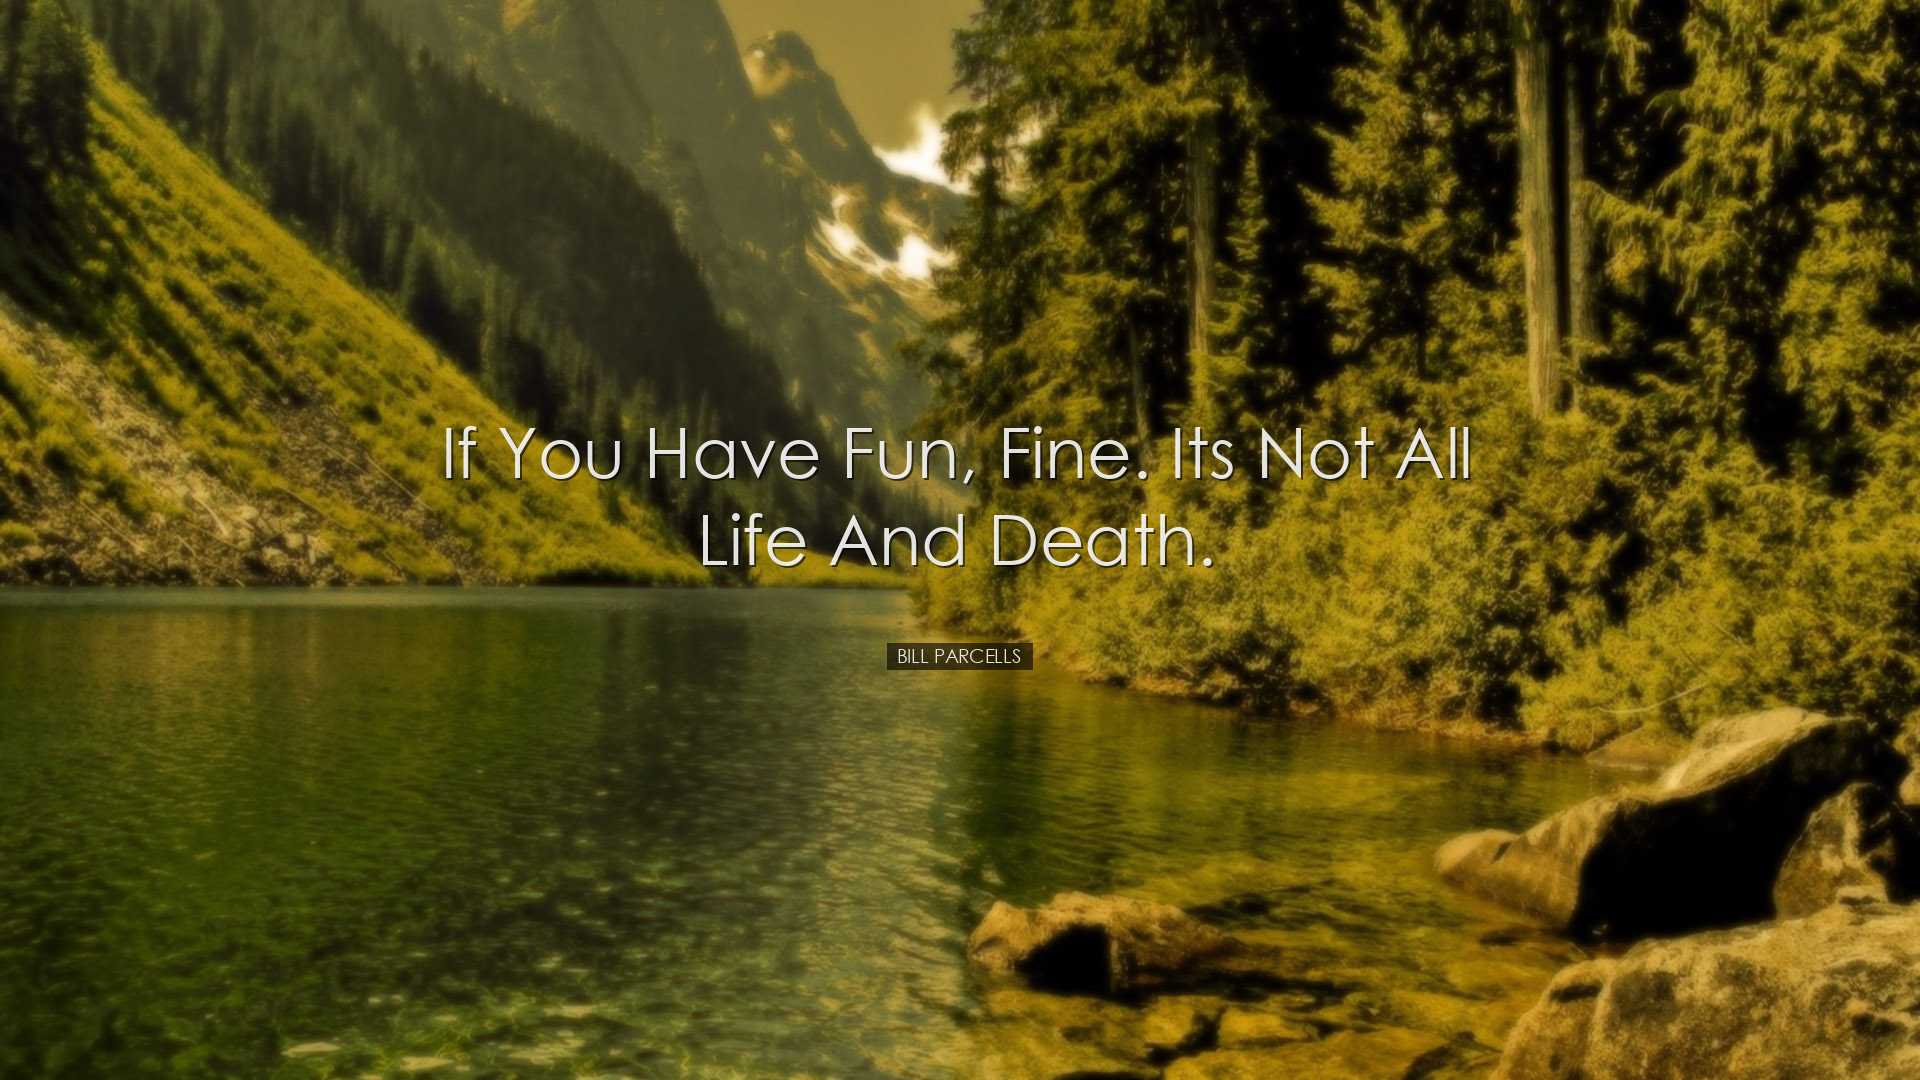 If you have fun, fine. Its not all life and death. - Bill Parcells